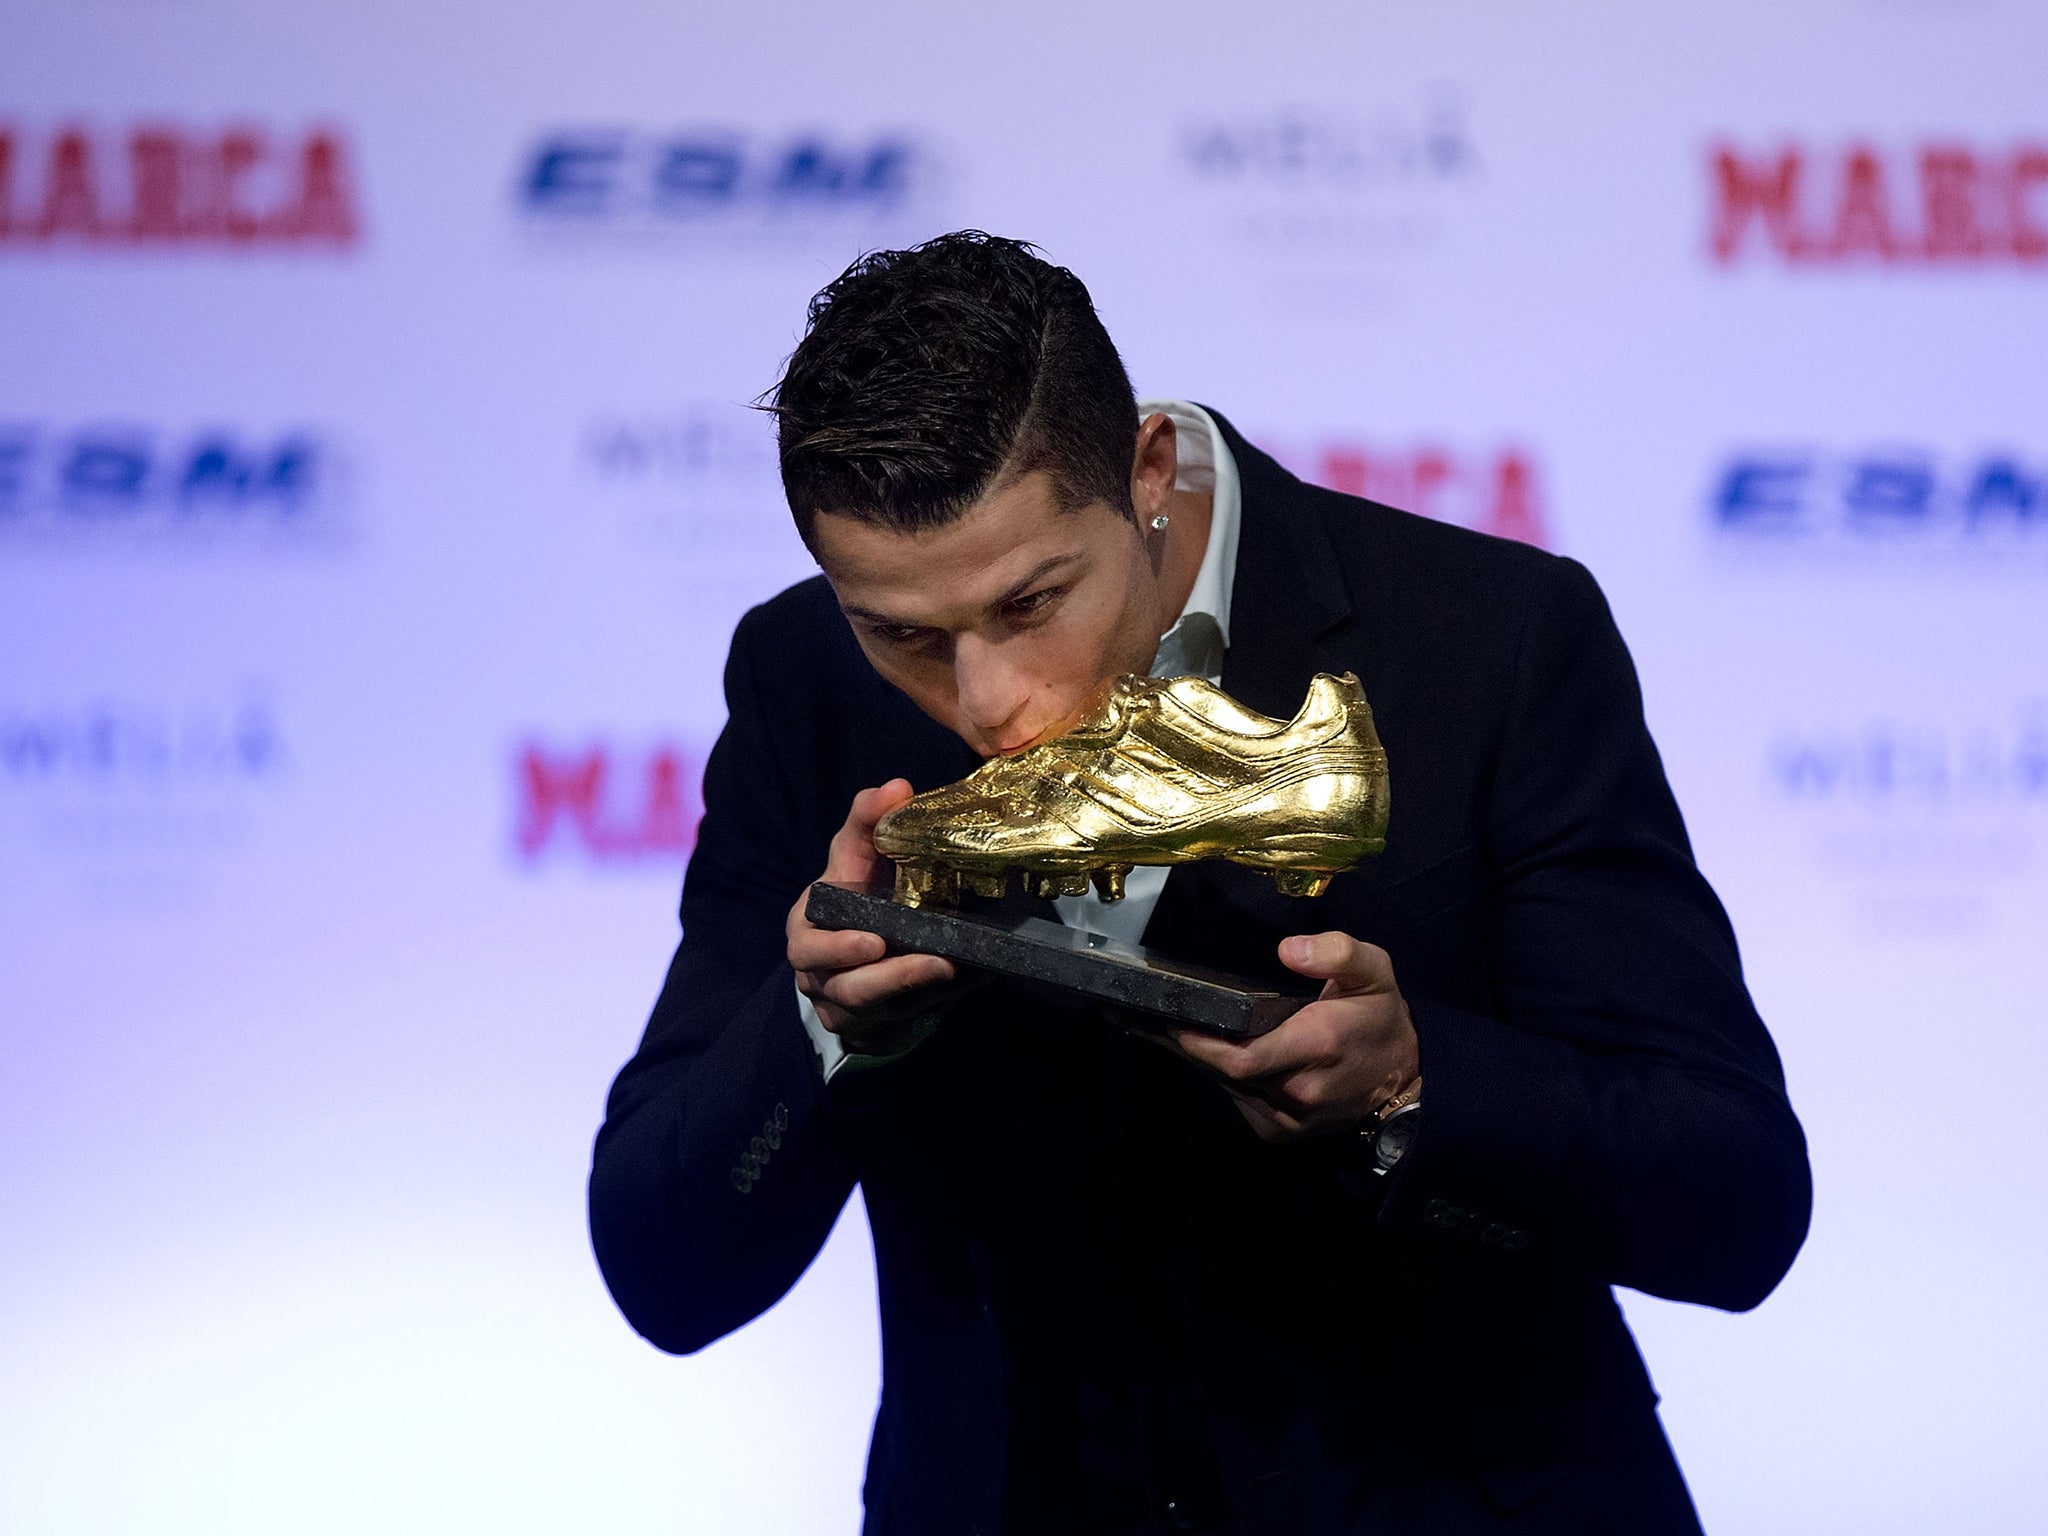 Cristiano Ronaldo with the Golden Boot